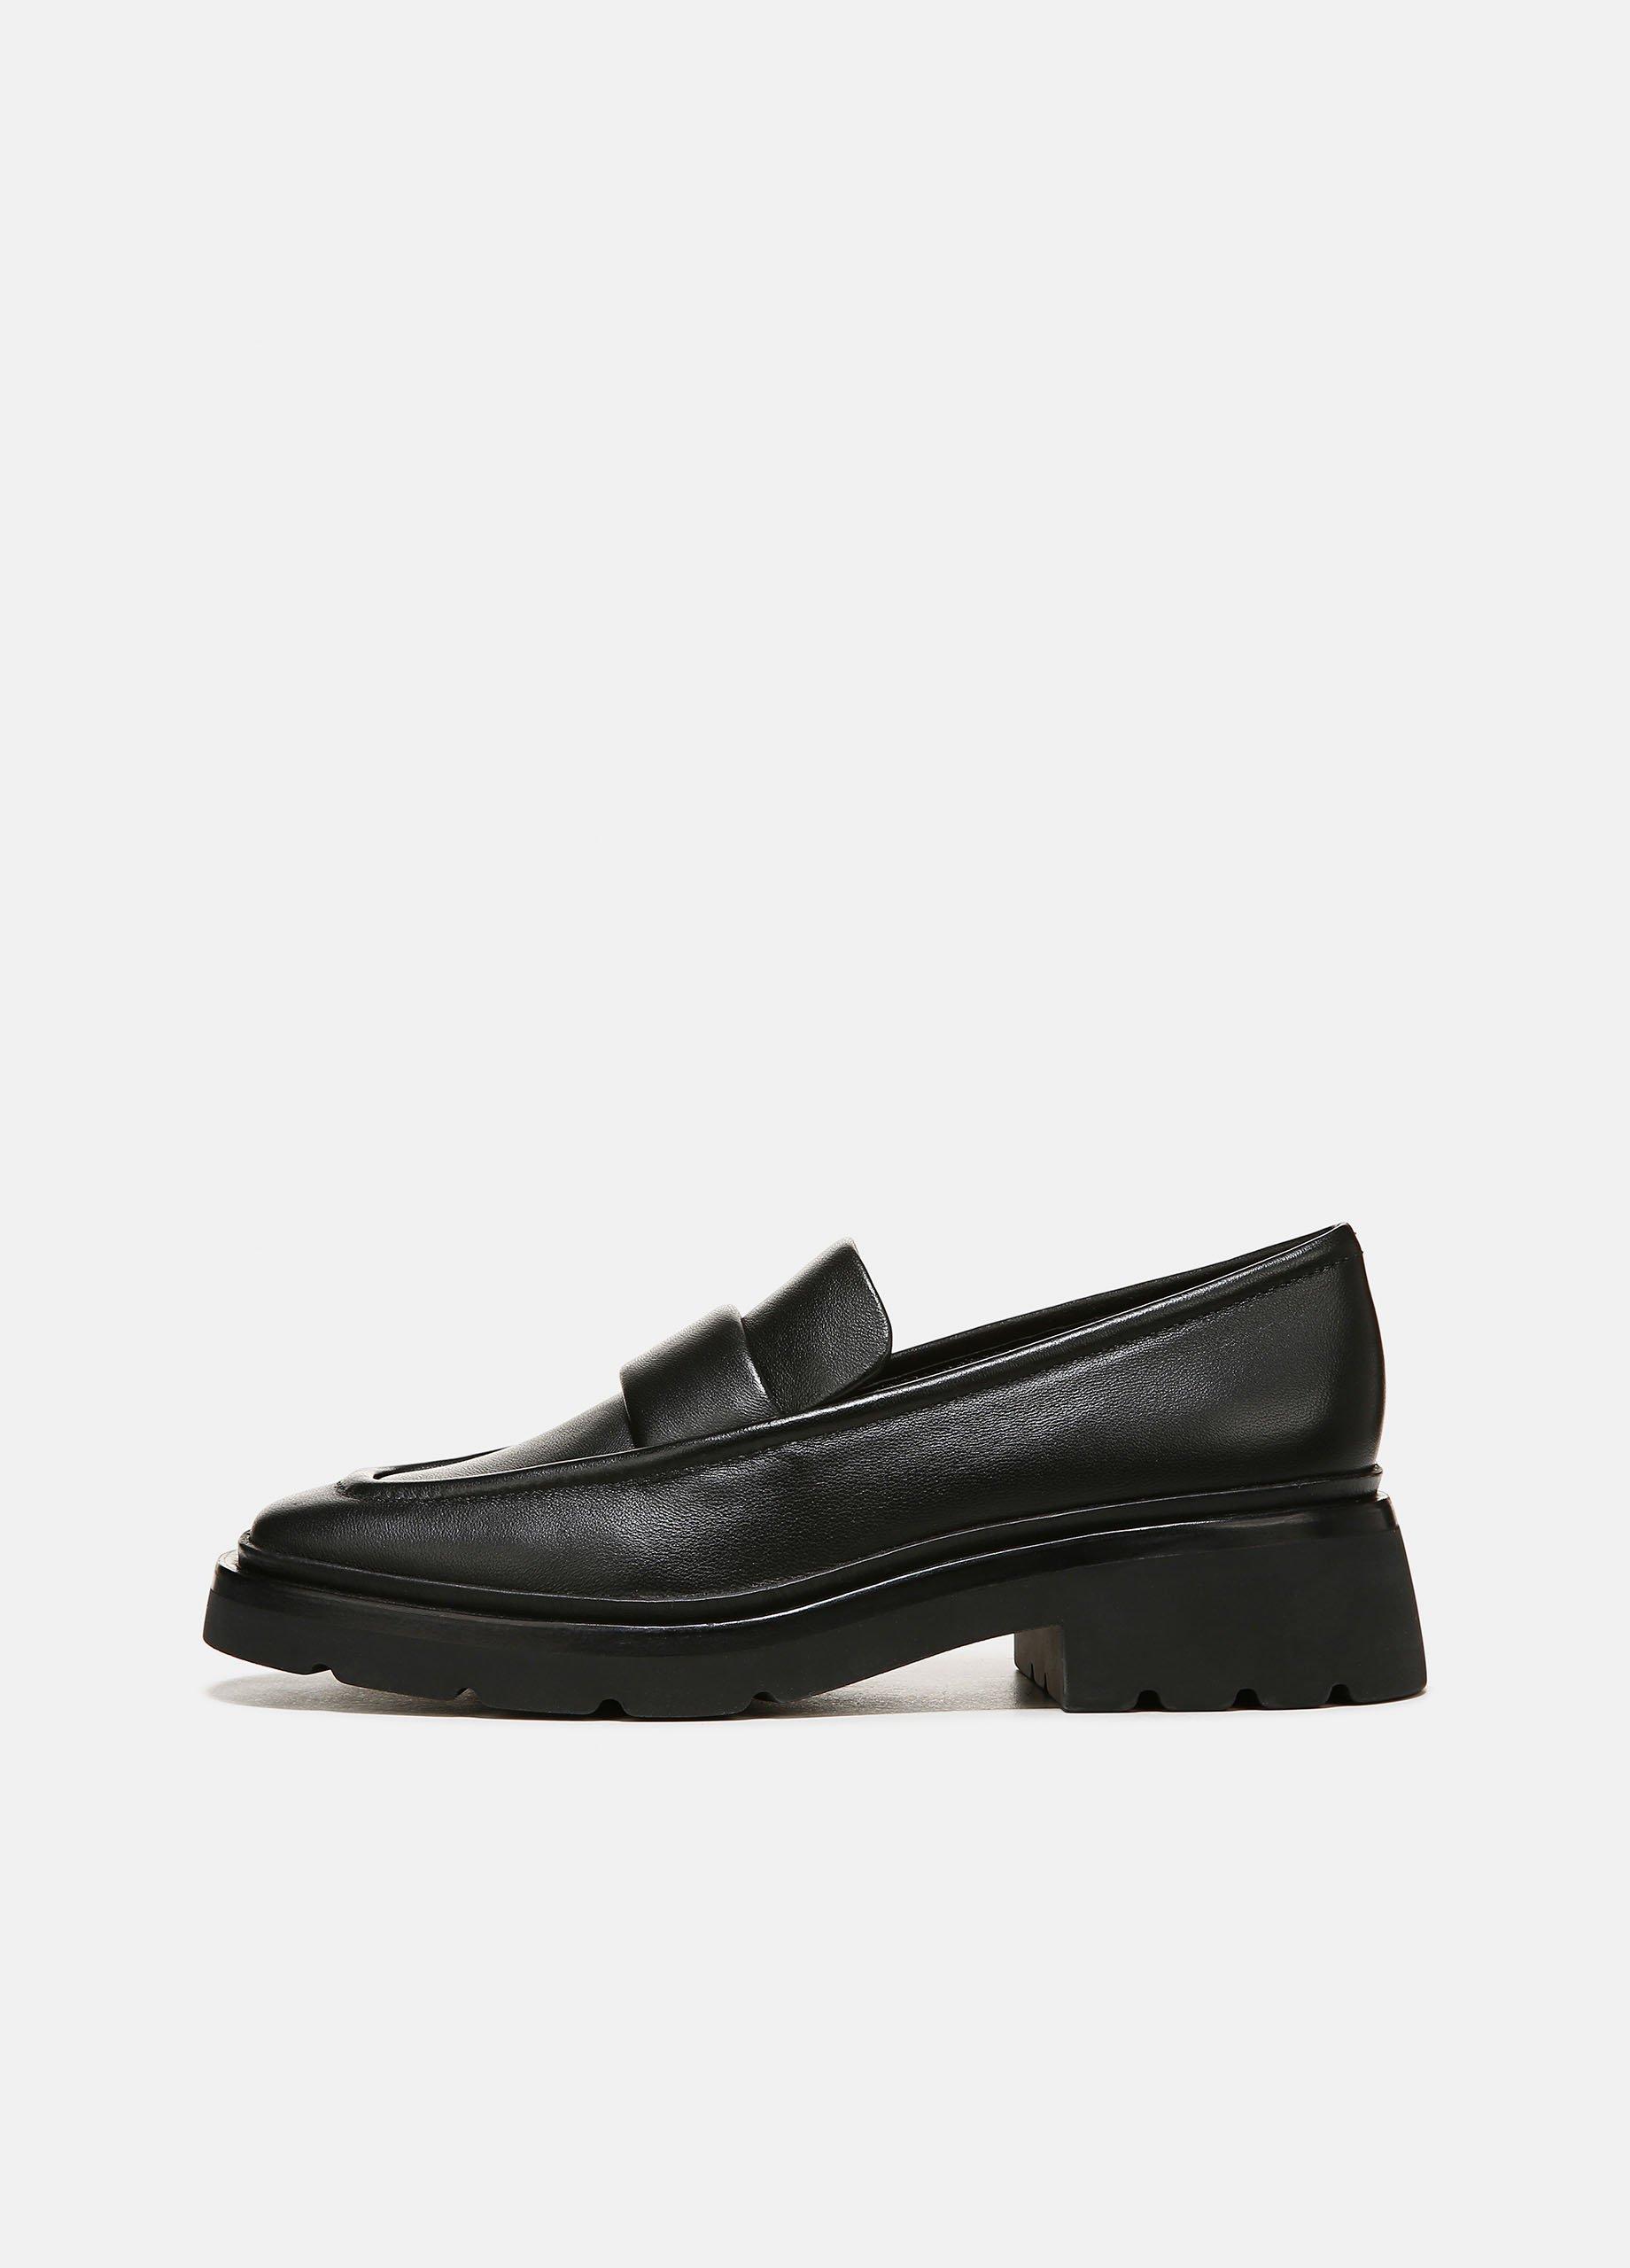 N° C9016 The Formal Leather Loafer